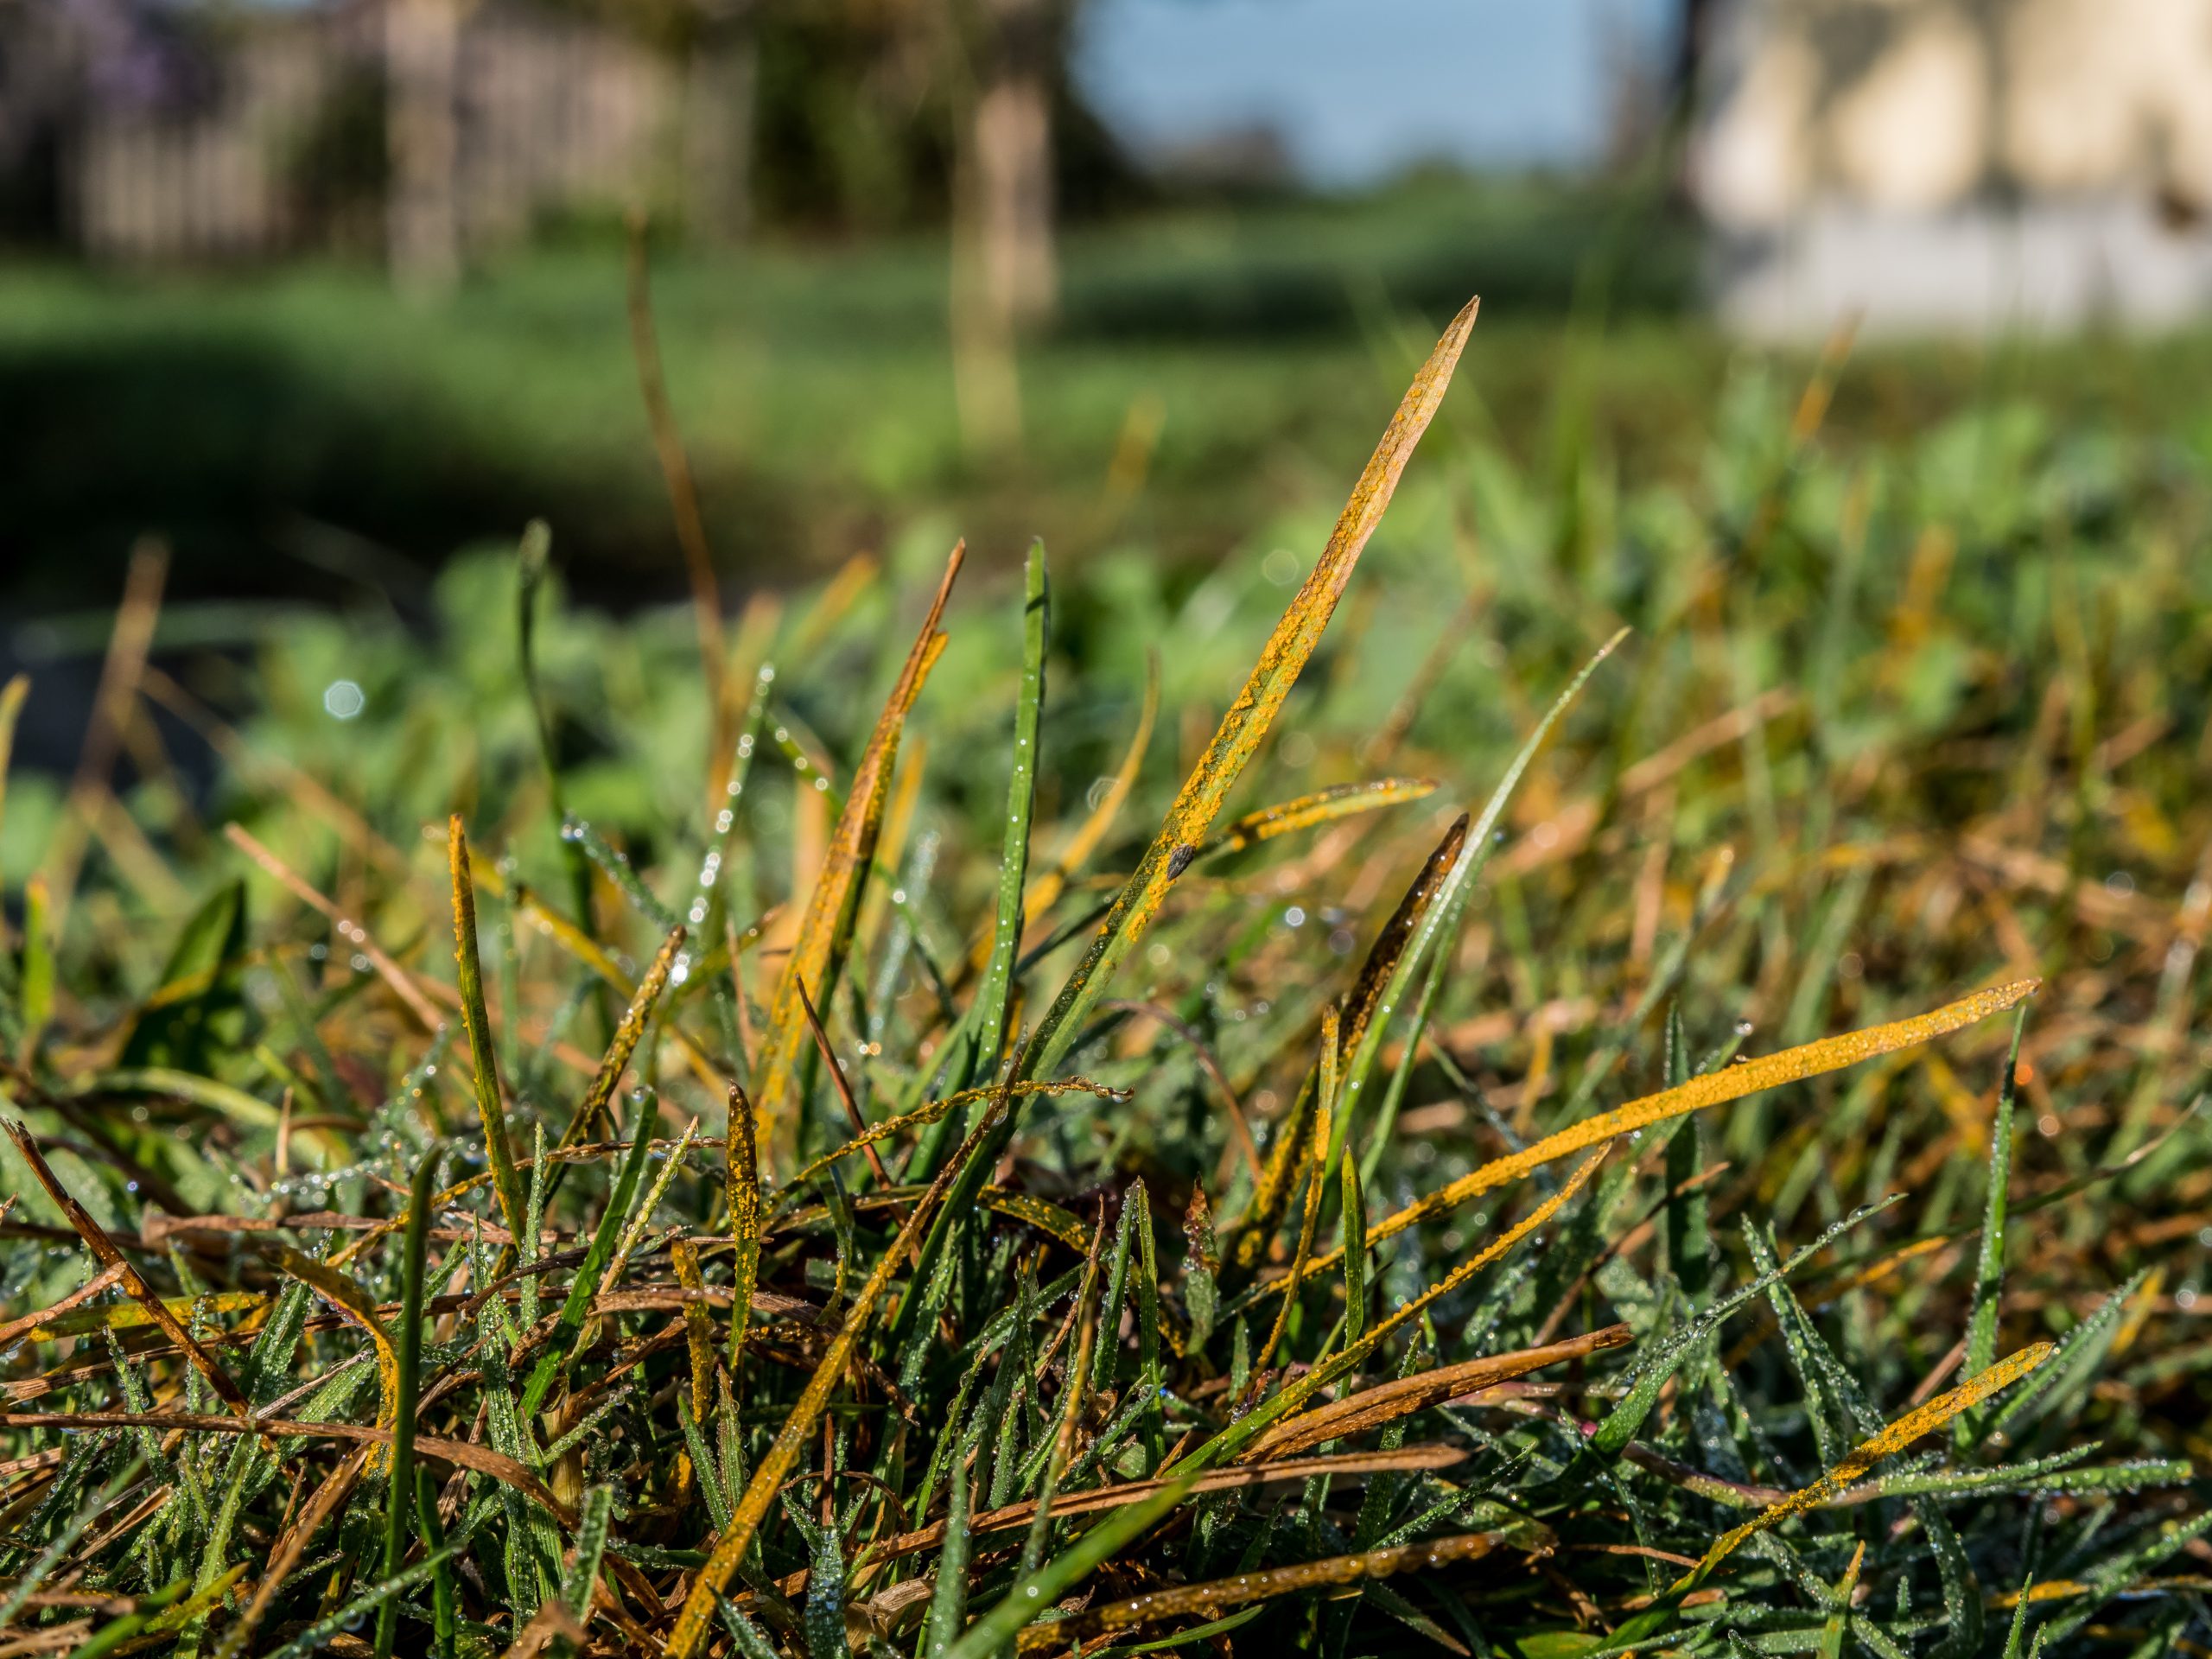 Lawn or turf with rust. fungal disease caused by Puccinia. Rust infected turf has a yellow-brown color.  Grass blades reveals numerous yellow-orange pustules. 